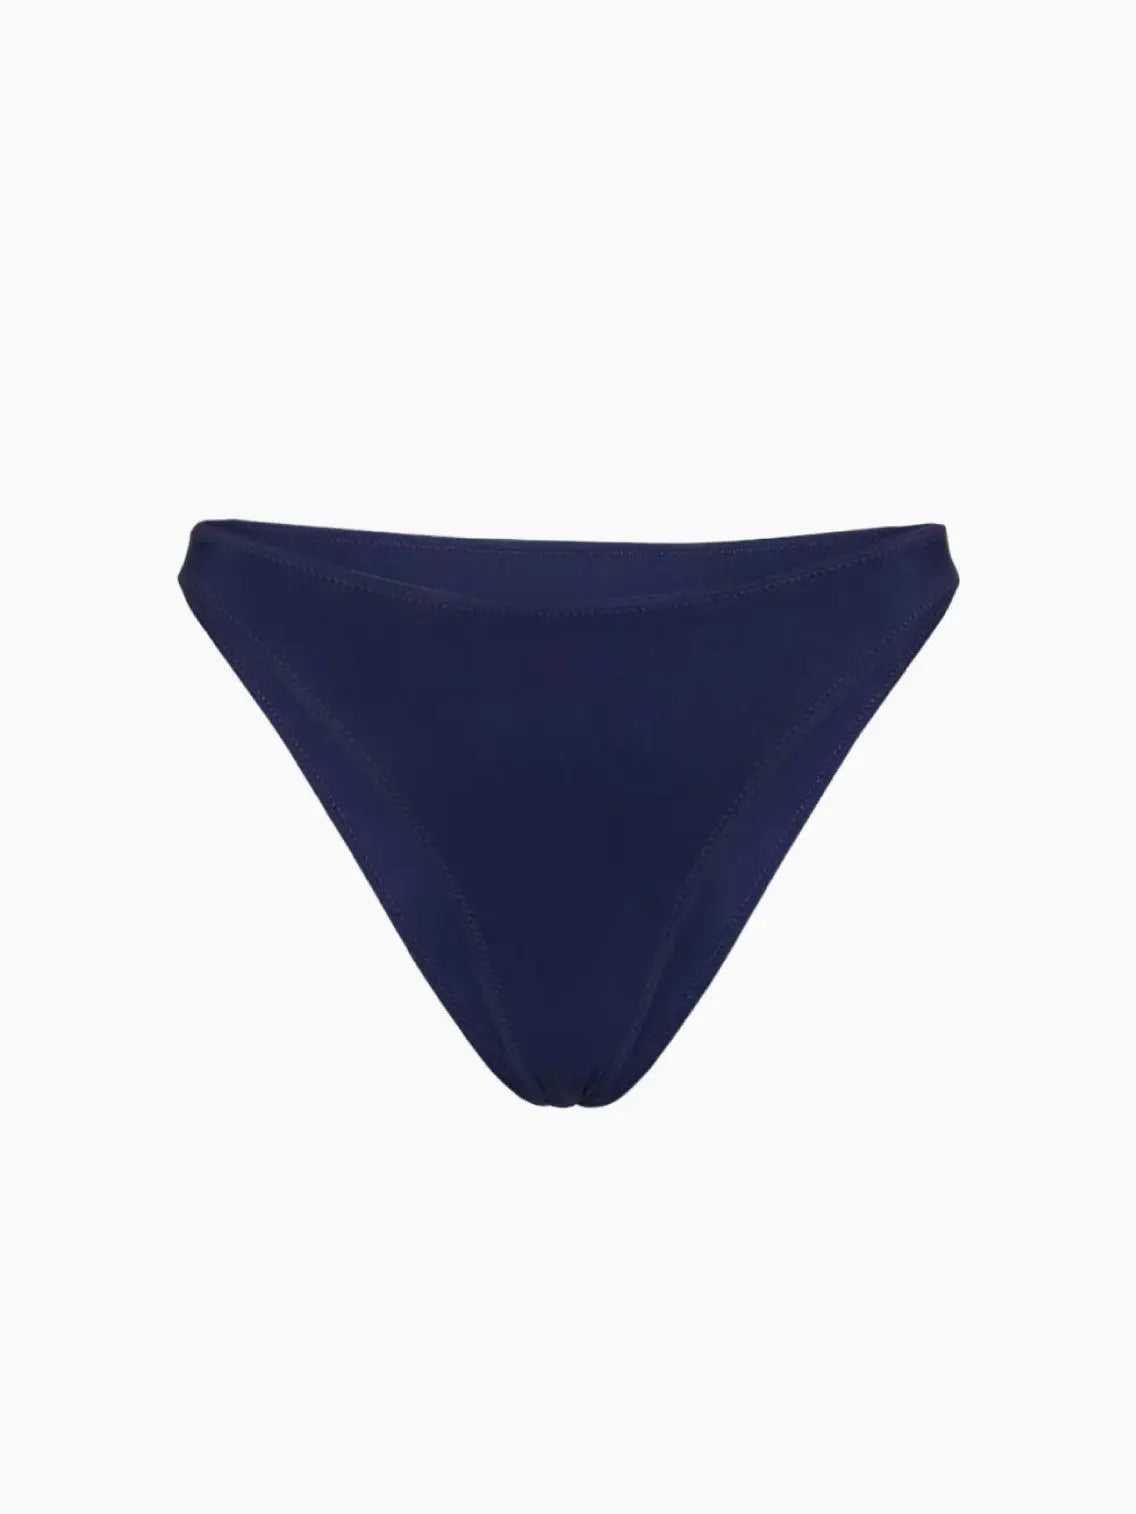 A Trentuno Bikini Bottom Navy with a simple, classic design from Lido. The fabric appears smooth and fitted, and the item is displayed on a plain white background. Perfect for a stylish summer in Barcelona, available now at BassalStore.